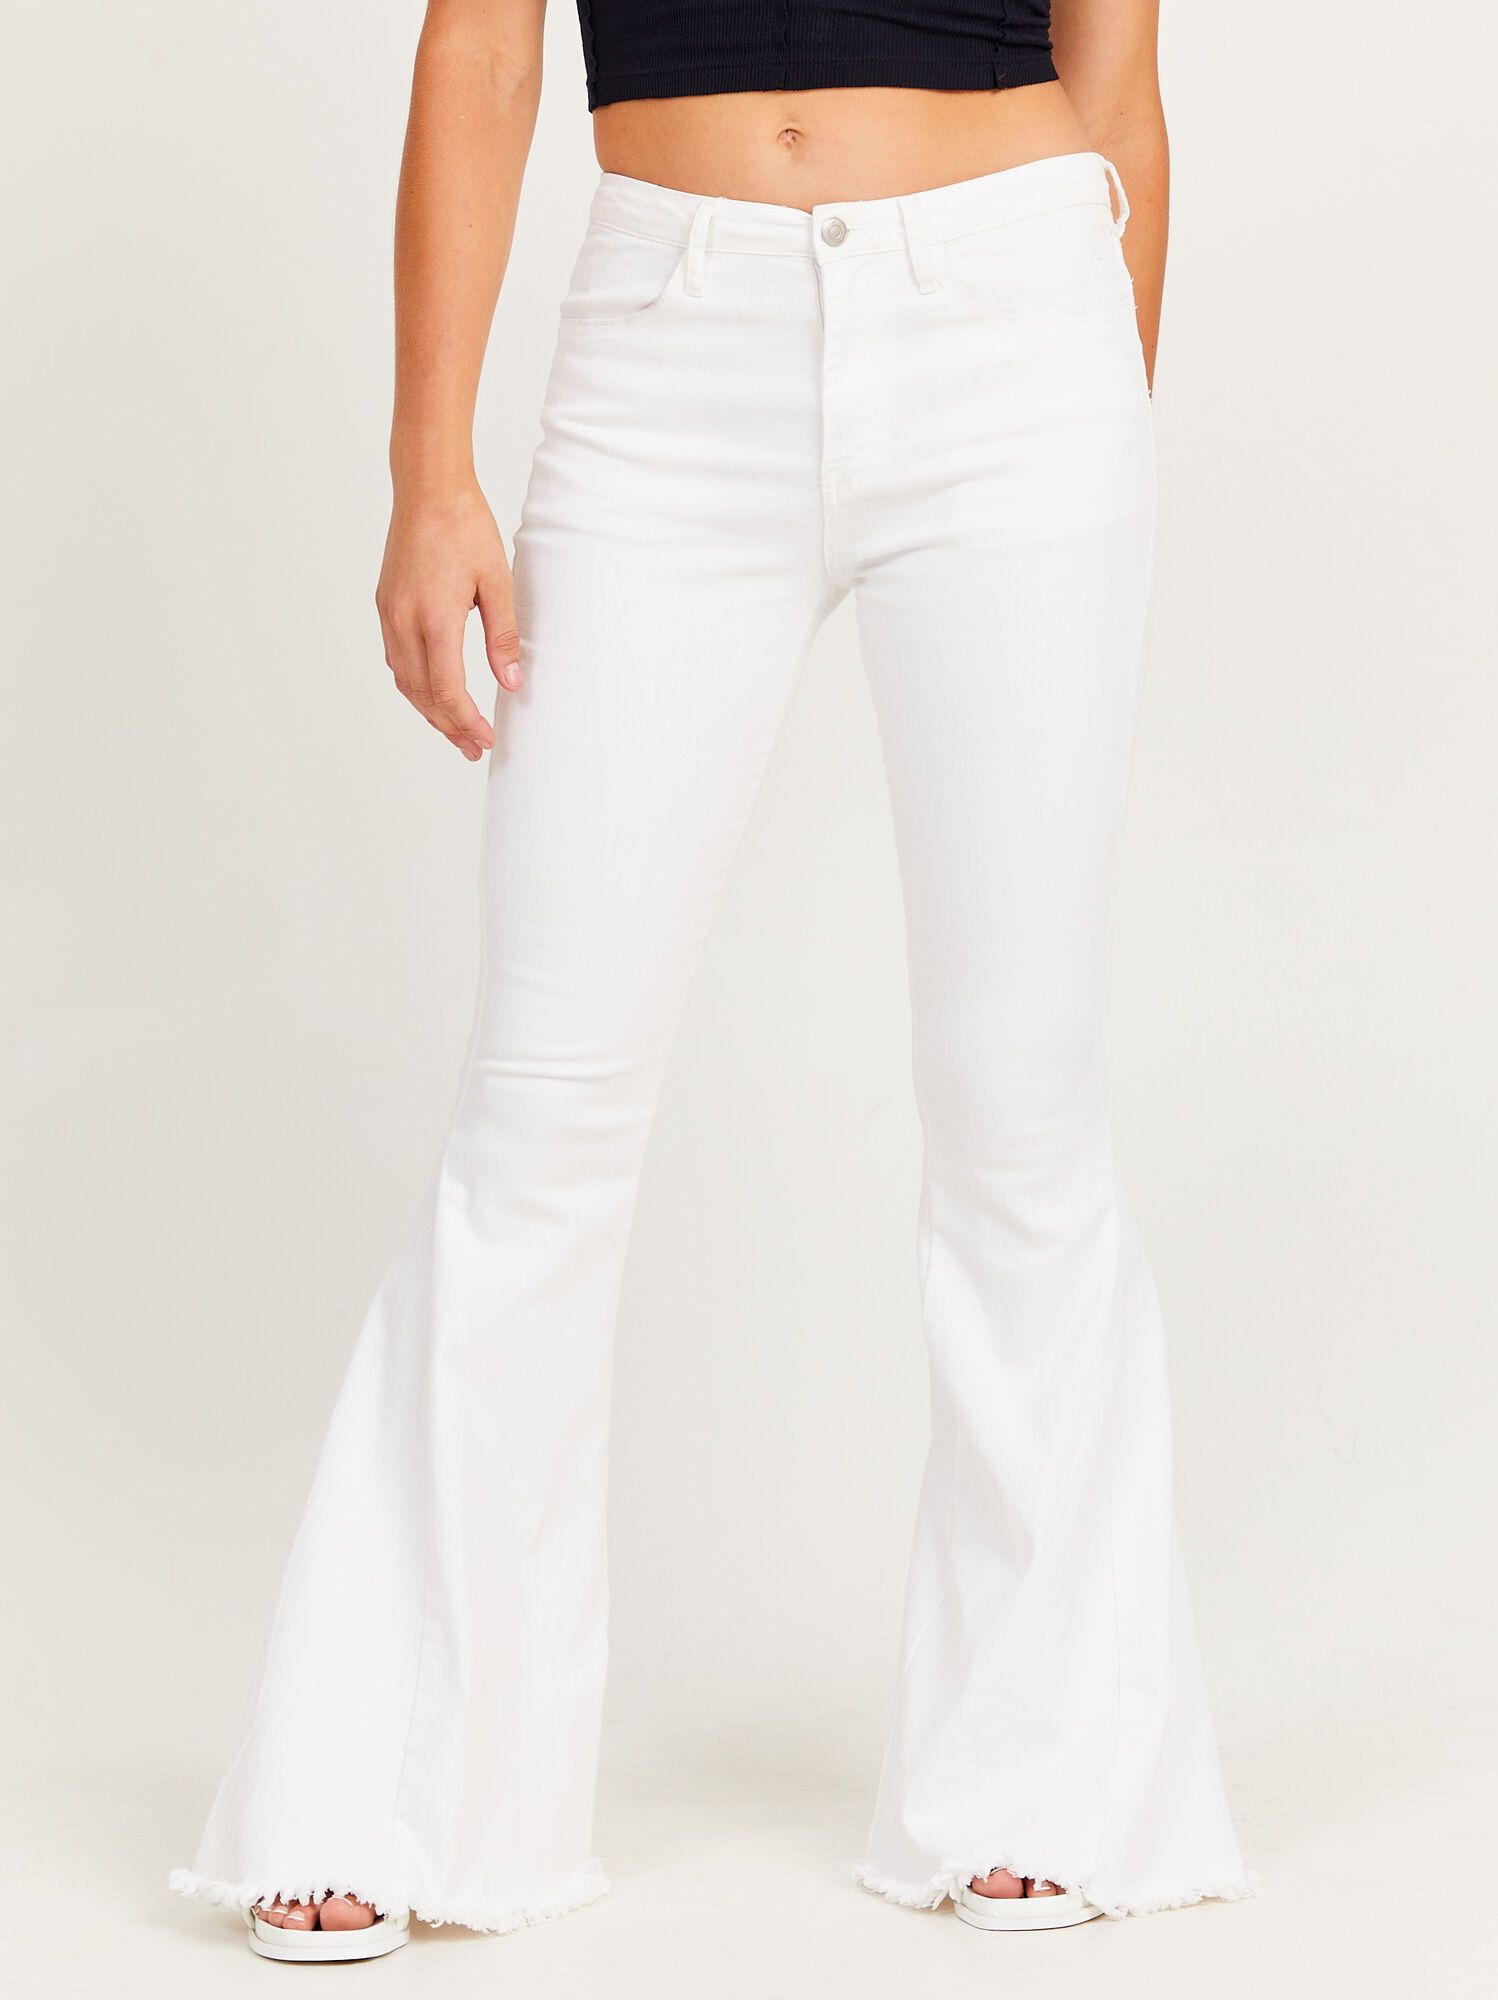 Tennley White Flare Jeans | Altar'd State | Altar'd State